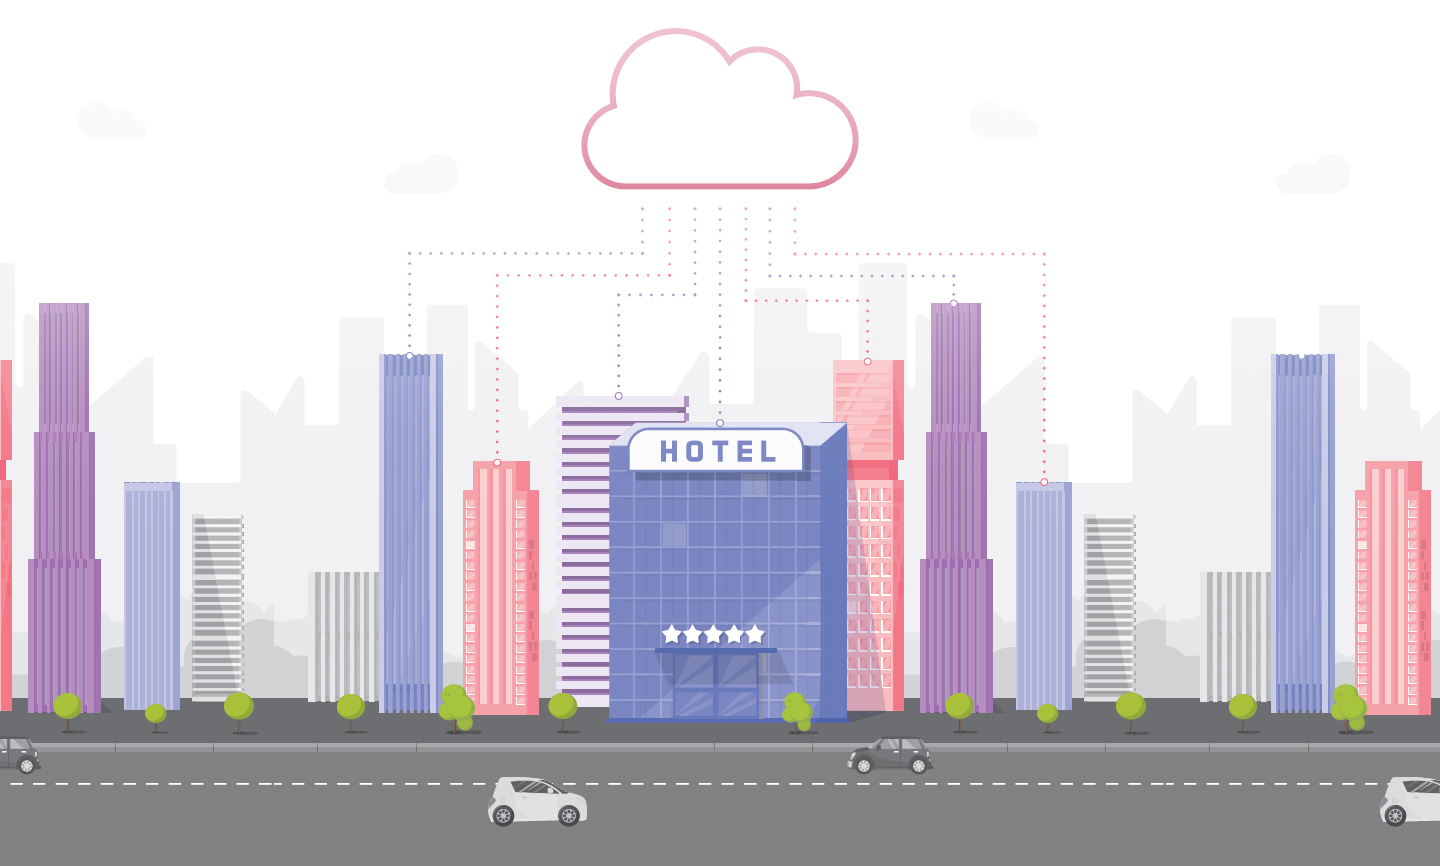 Introducing cloud-based solutions for integrated management, helping hotels customize their content and deliver intuitive, interactive services to clients. Thanks to LG’s Pro:Centric Cloud technology, hotels are a home away from home.